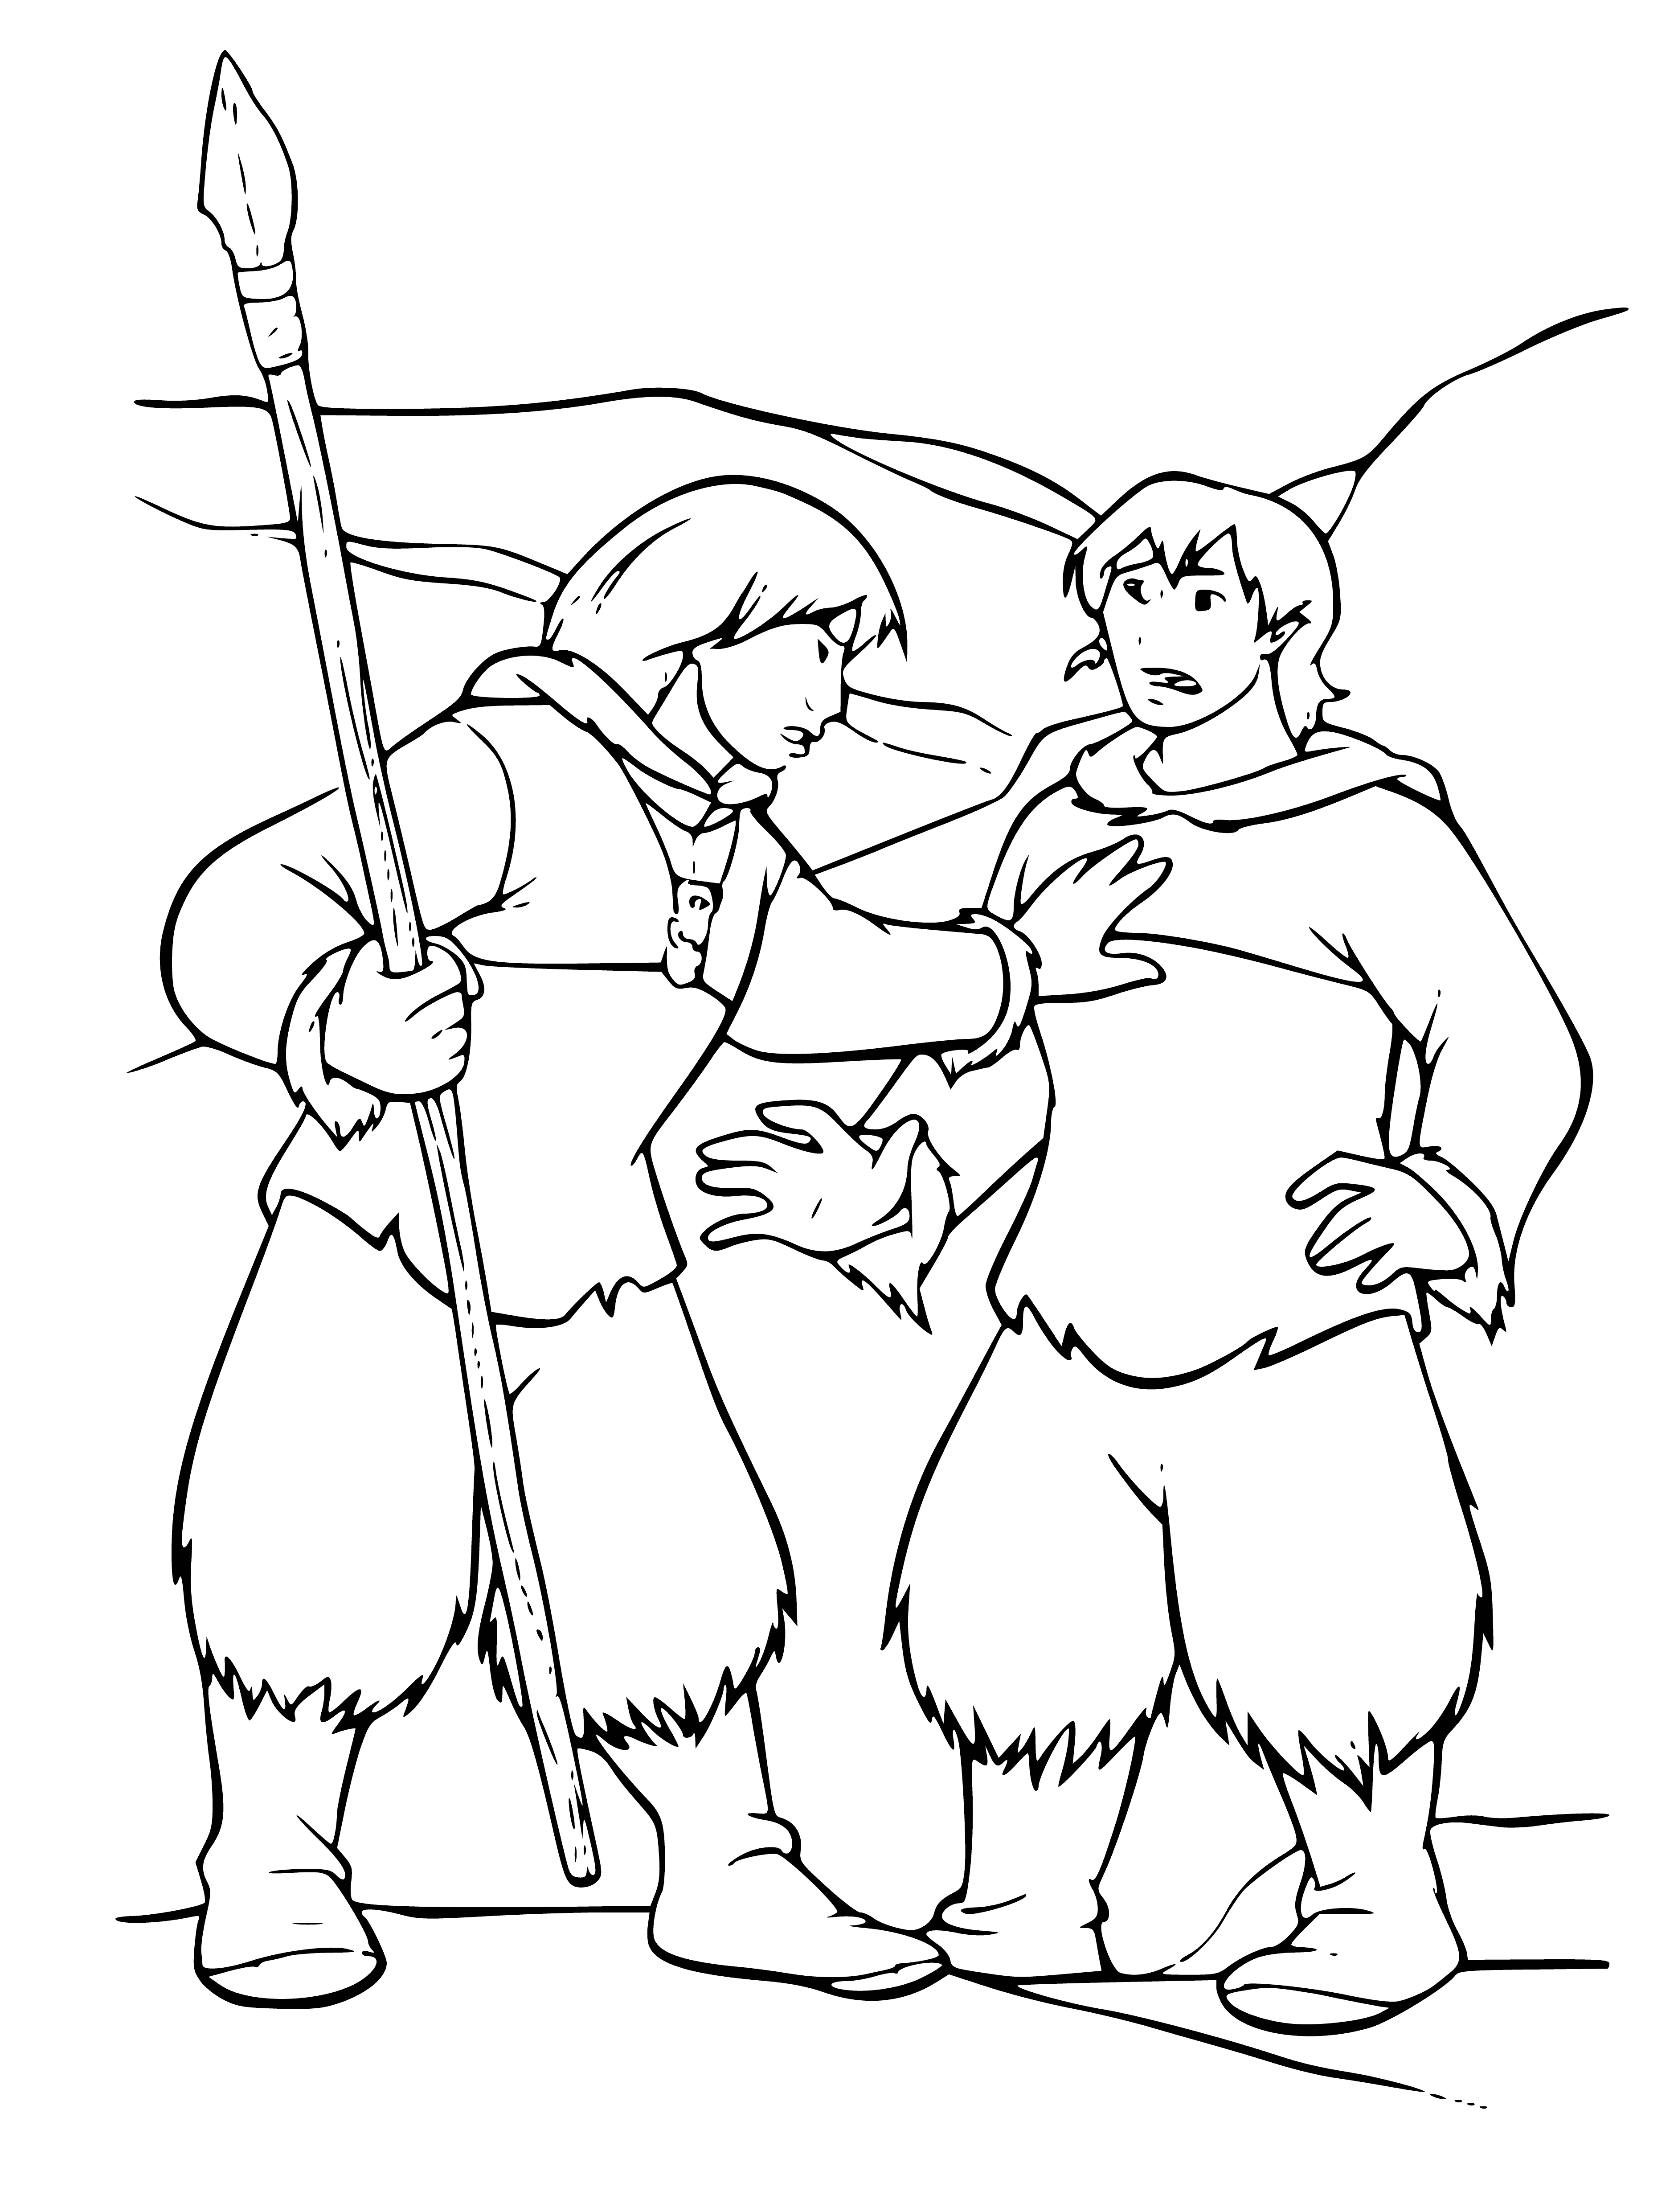 Dispute coloring page